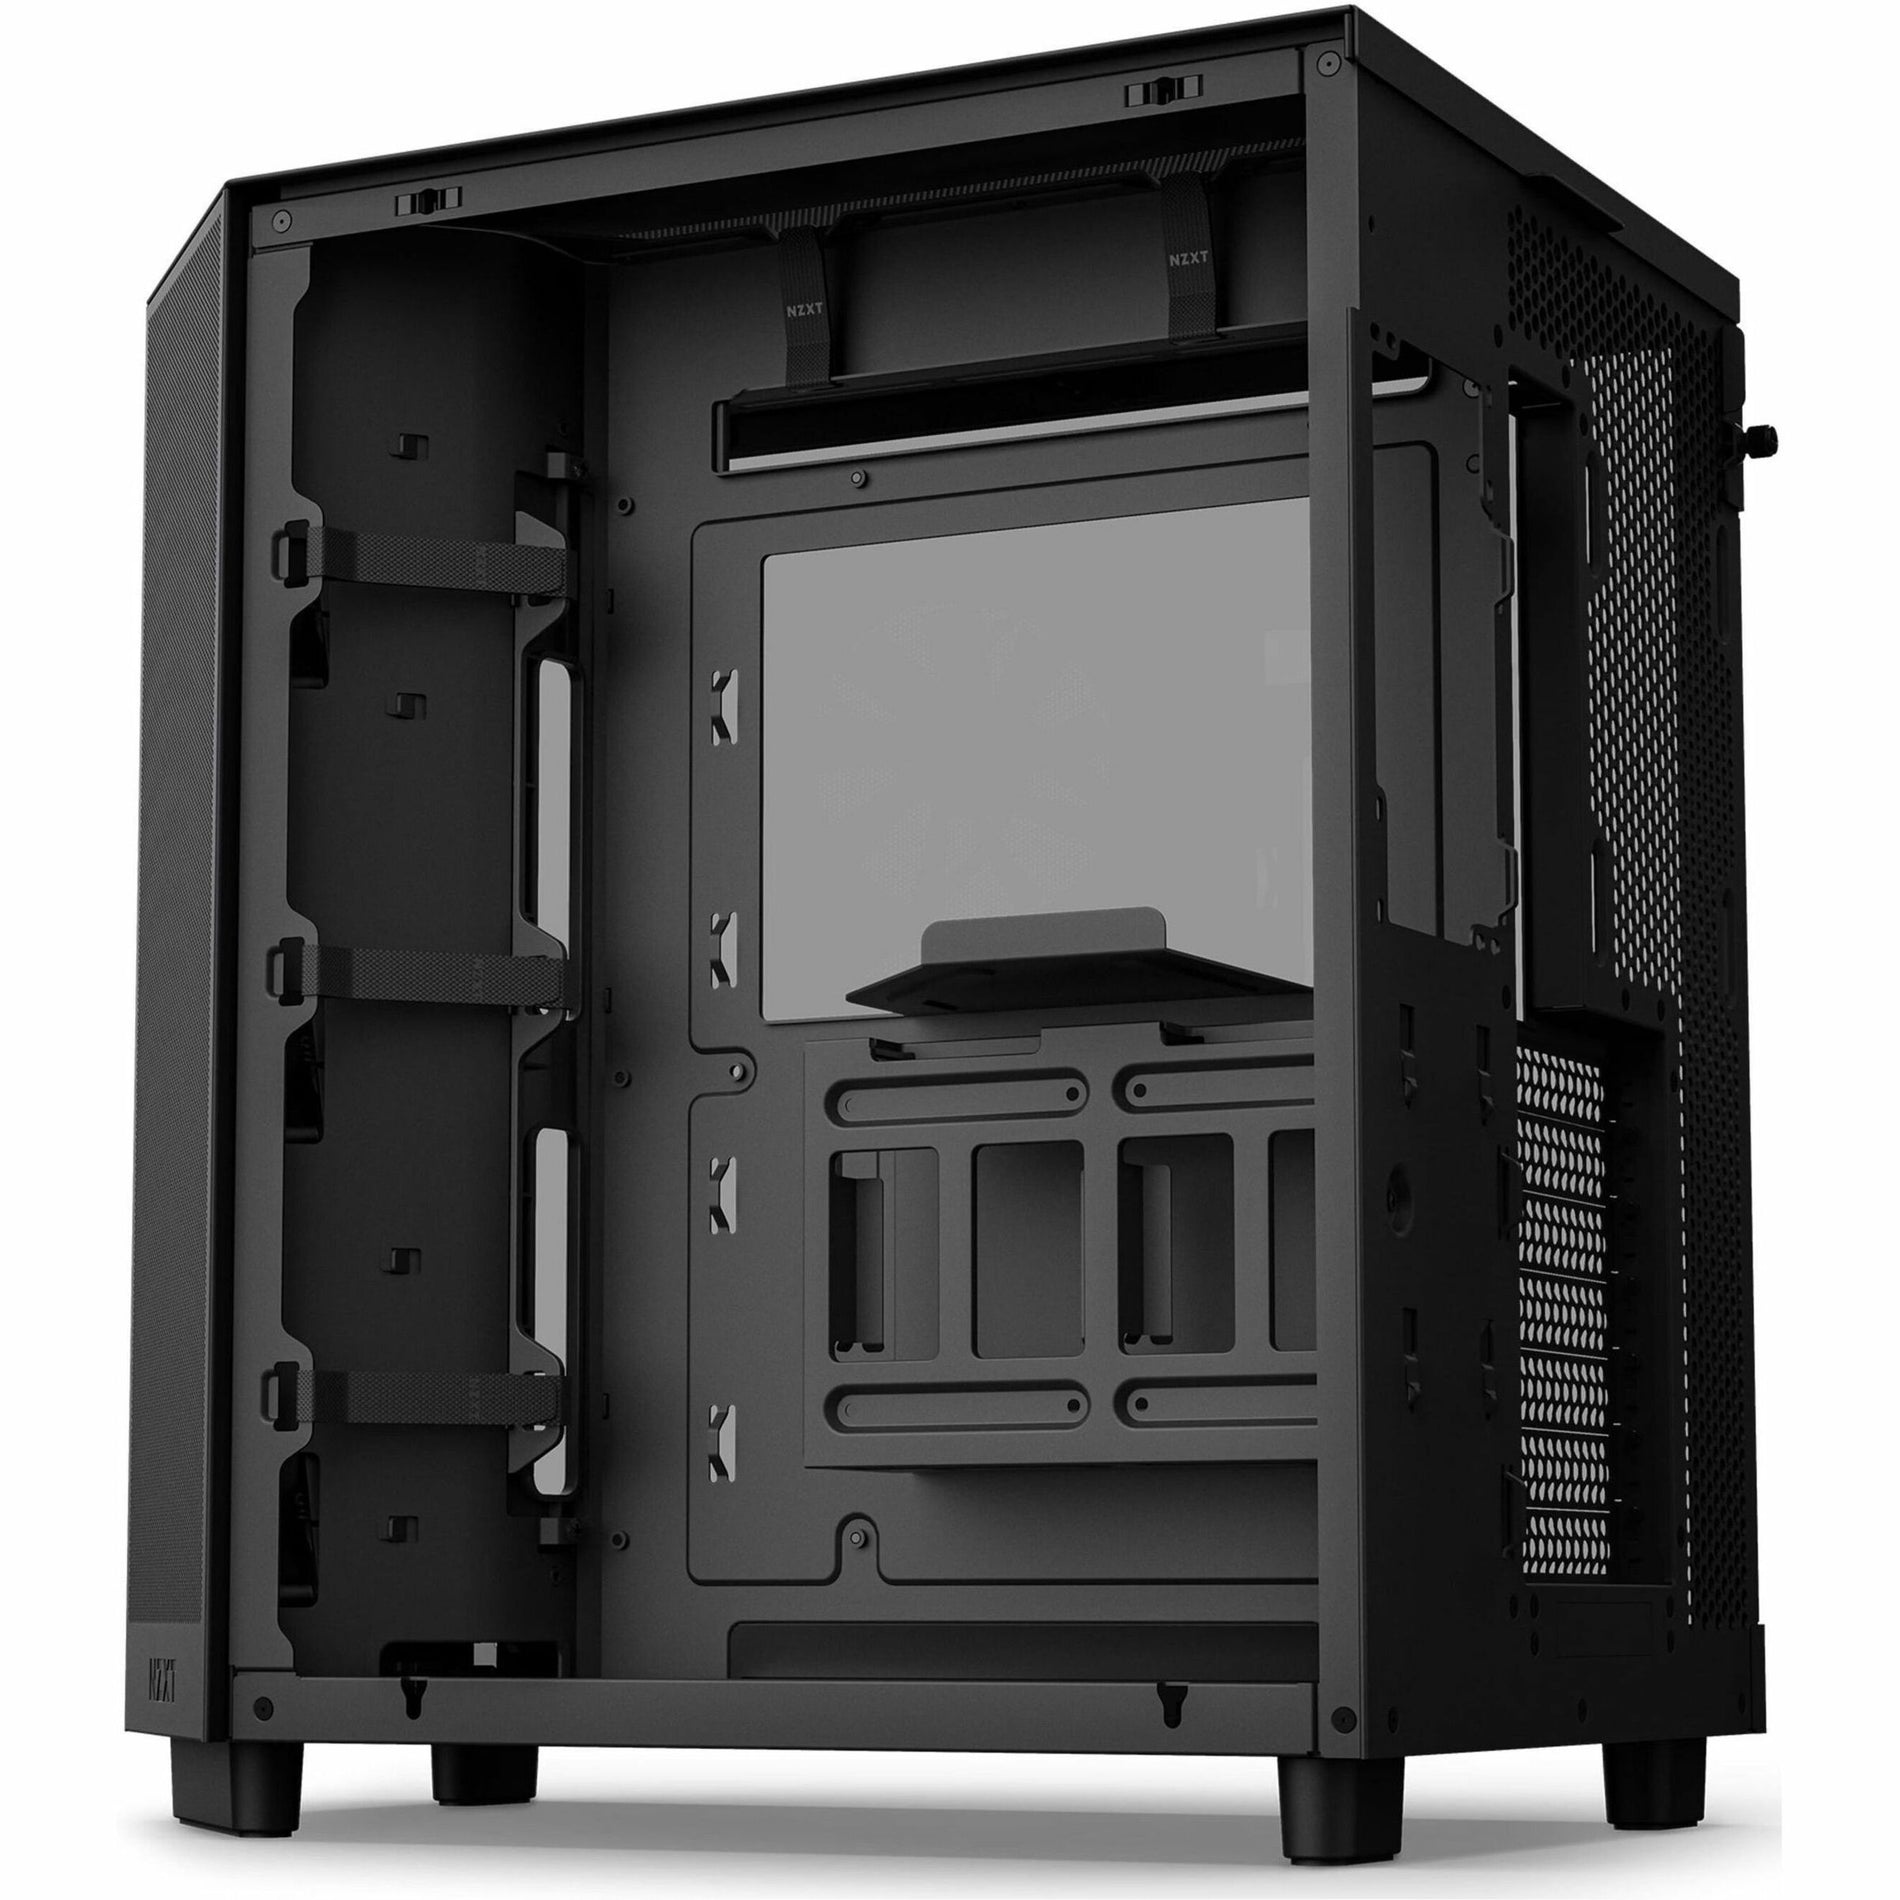 NZXT H6 Flow Compact Dual-Chamber Mid-Tower Airflow Case (CC-H61FB